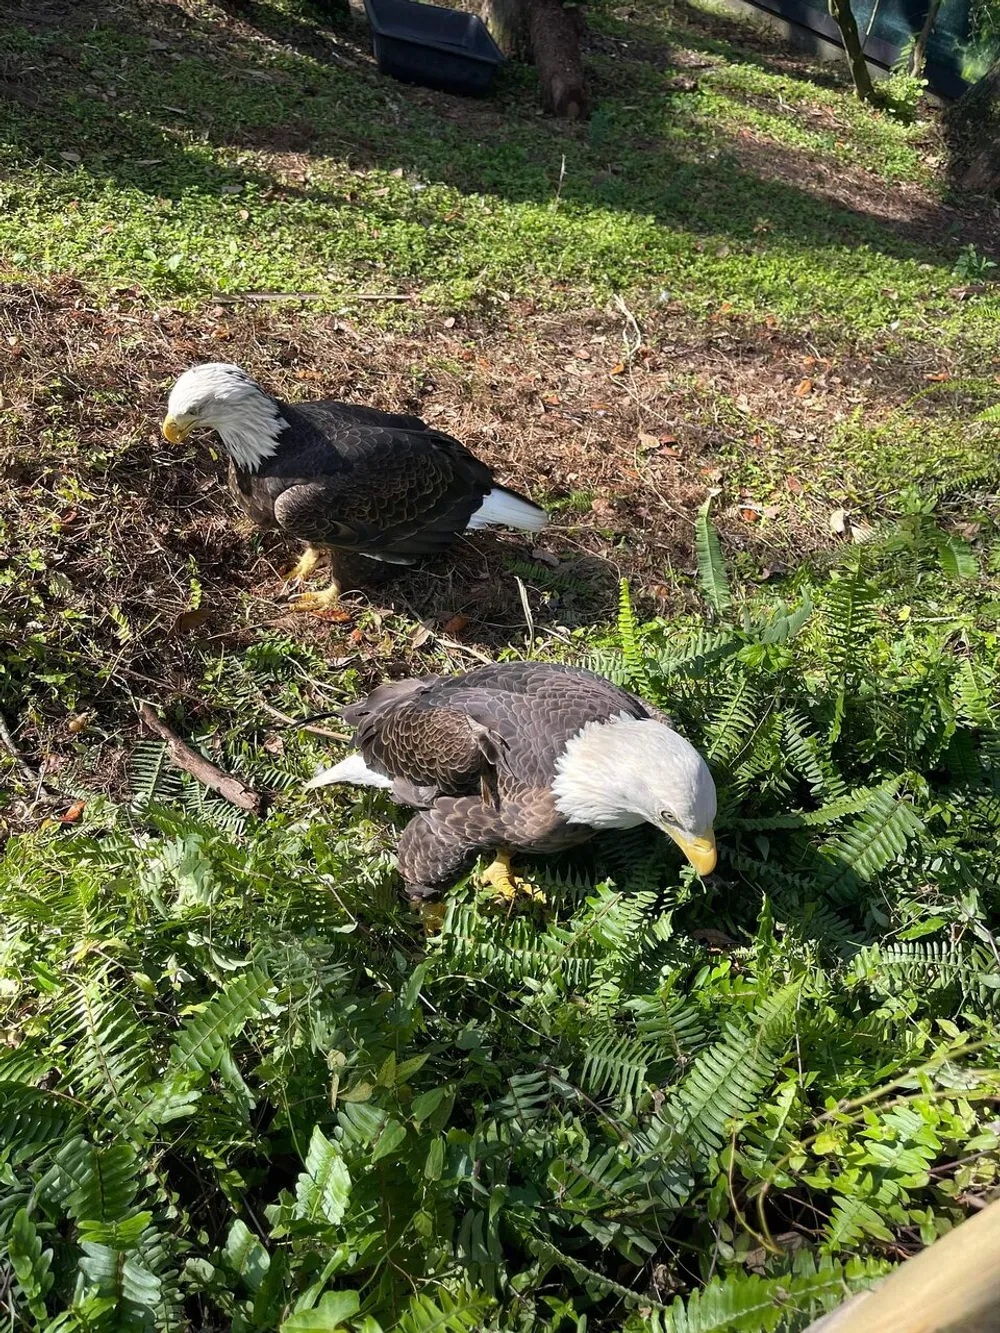 Two bald eagles are seen foraging on the ground among green ferns in a sunny environment